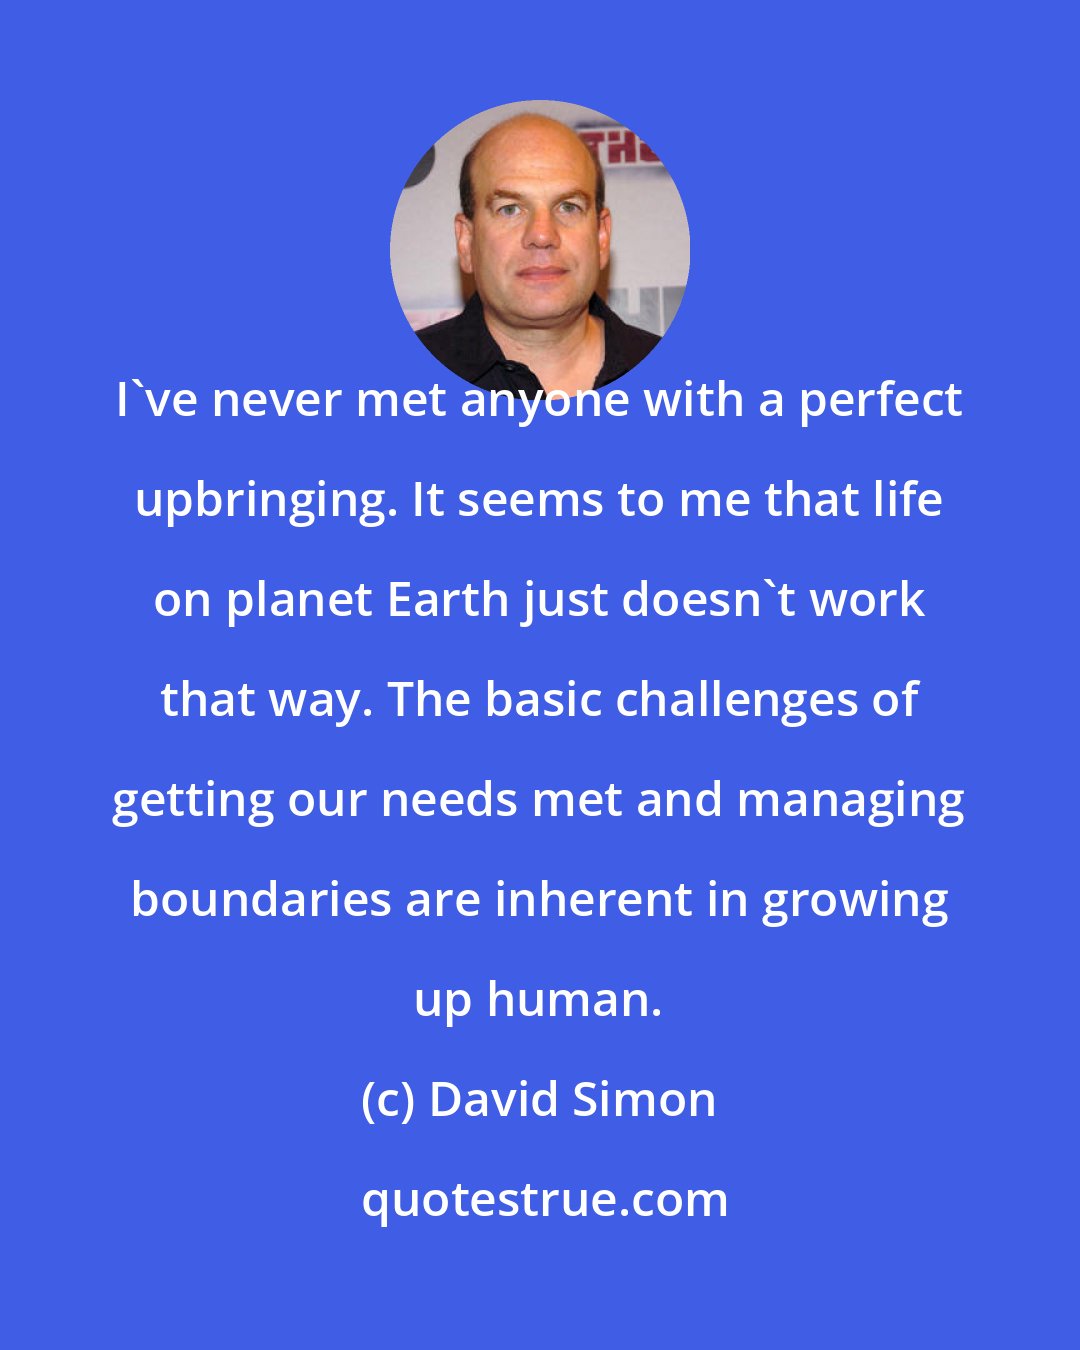 David Simon: I've never met anyone with a perfect upbringing. It seems to me that life on planet Earth just doesn't work that way. The basic challenges of getting our needs met and managing boundaries are inherent in growing up human.